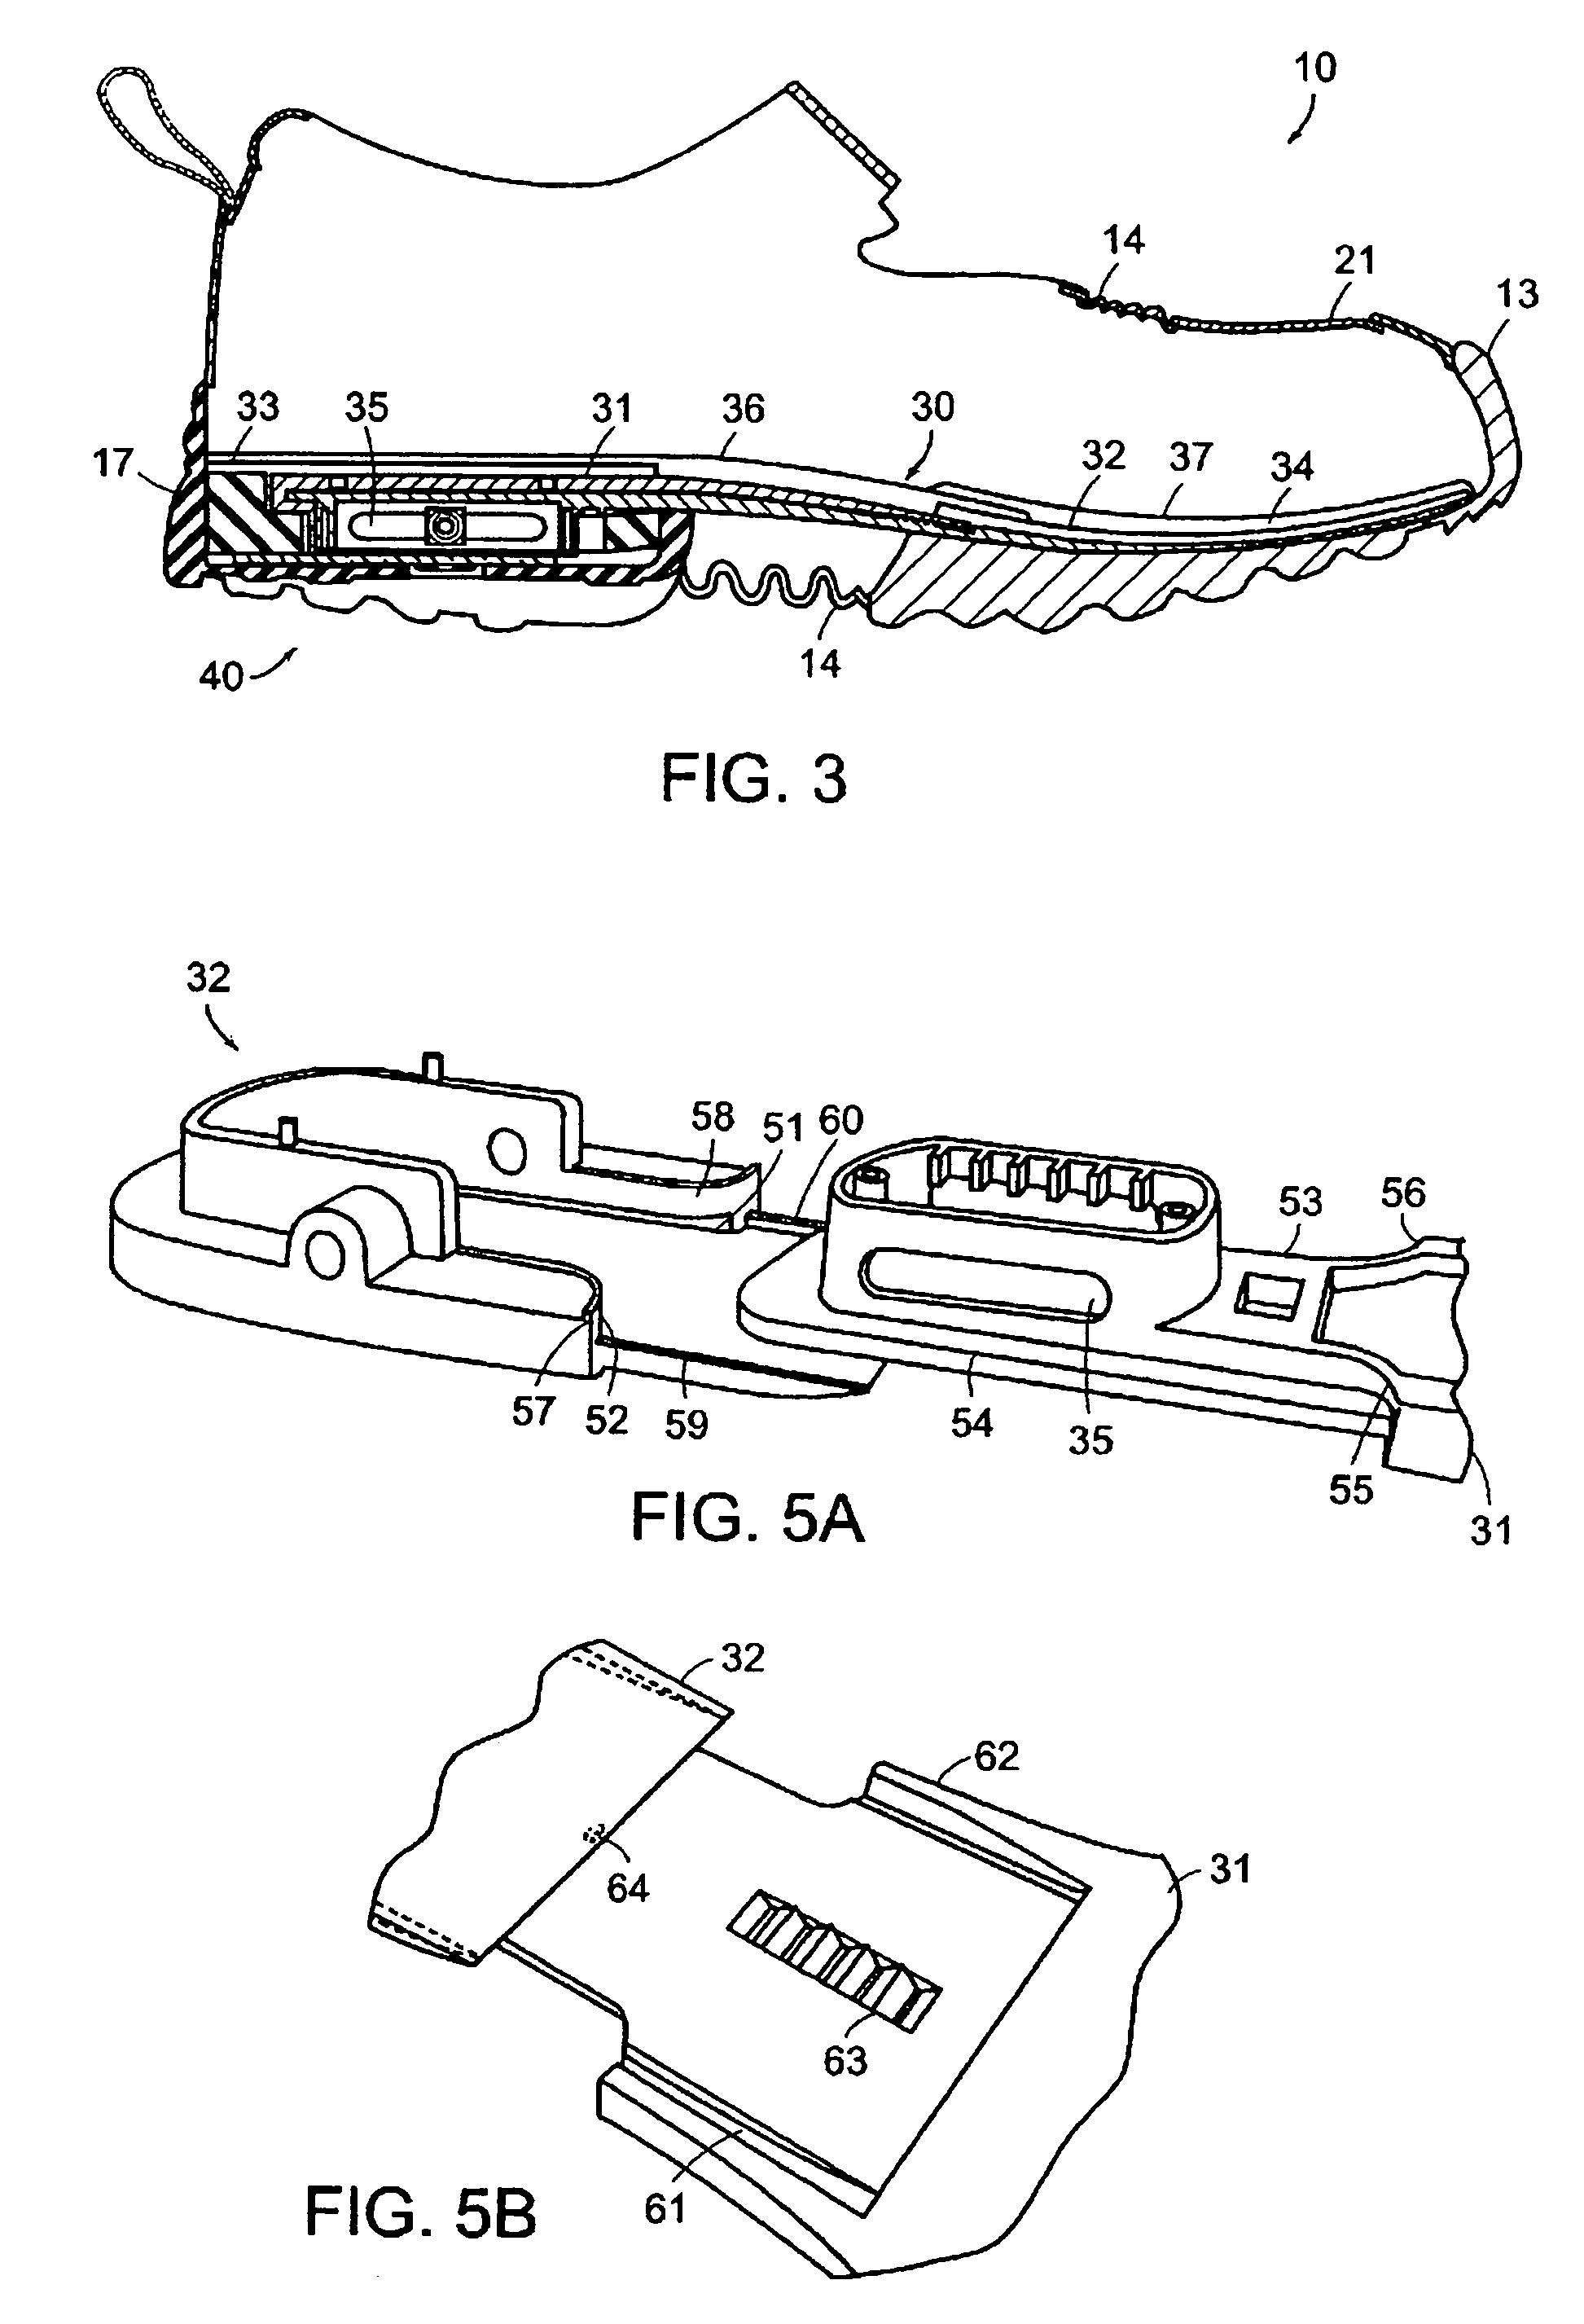 Method of making an expandable shoe